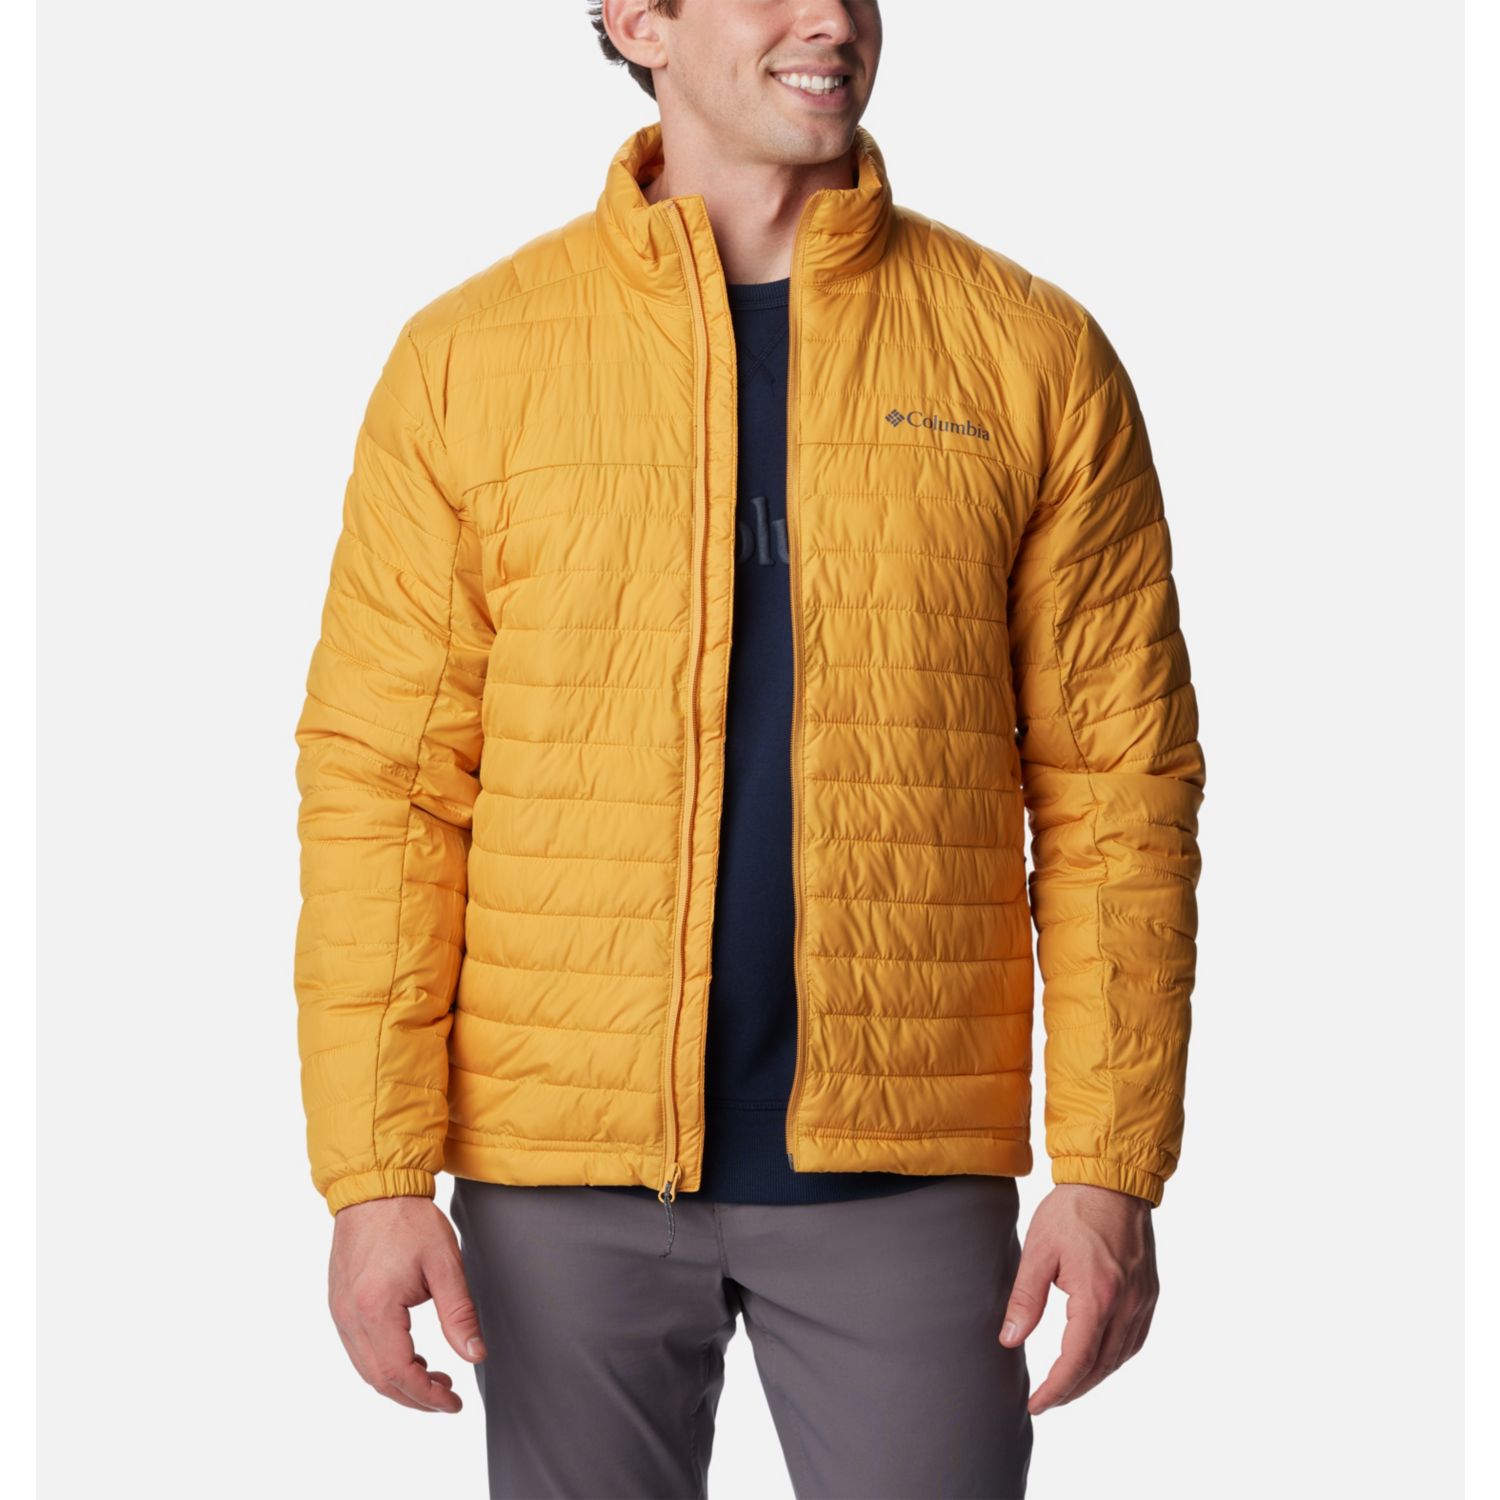 Columbia Men's Silver Falls Jacket (3 Colors, Various Sizes) $44 & More + Free Shipping